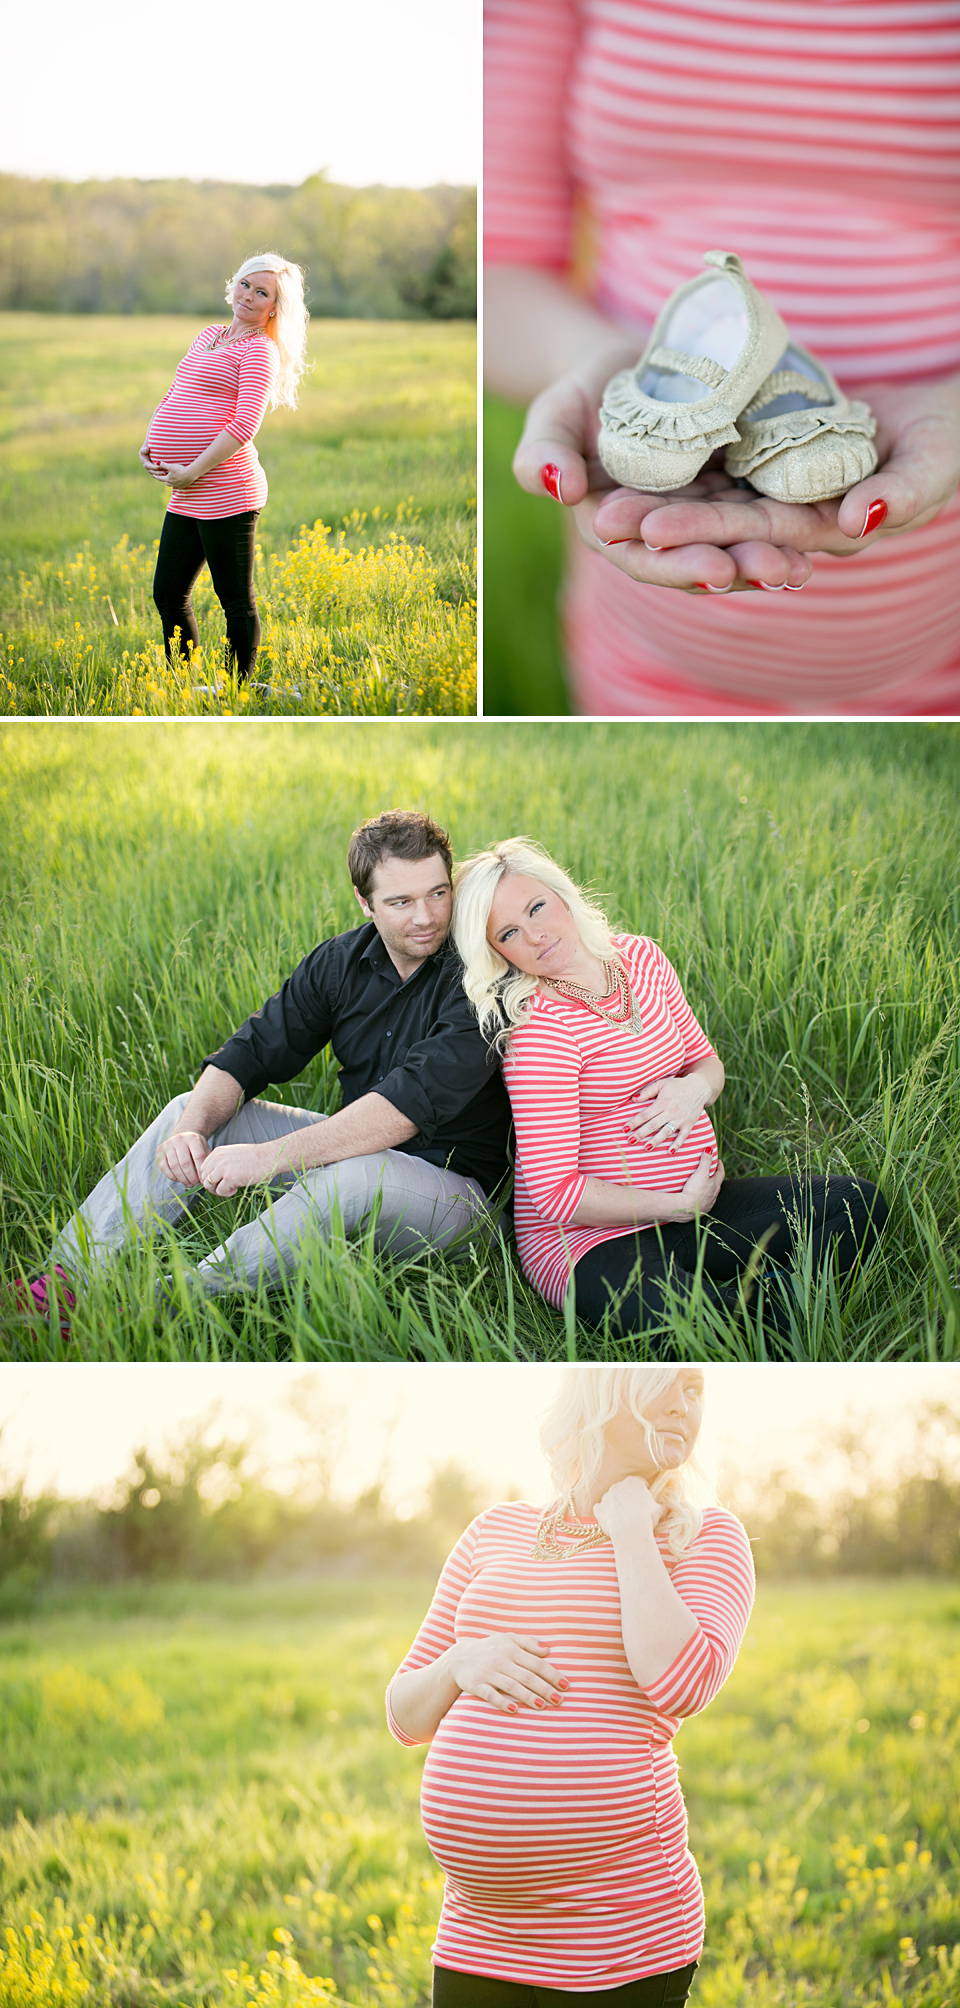 Blue Springs Lake, Belly portraits, Jana Marie Photography, Crazy Dog, Couples, sunlight